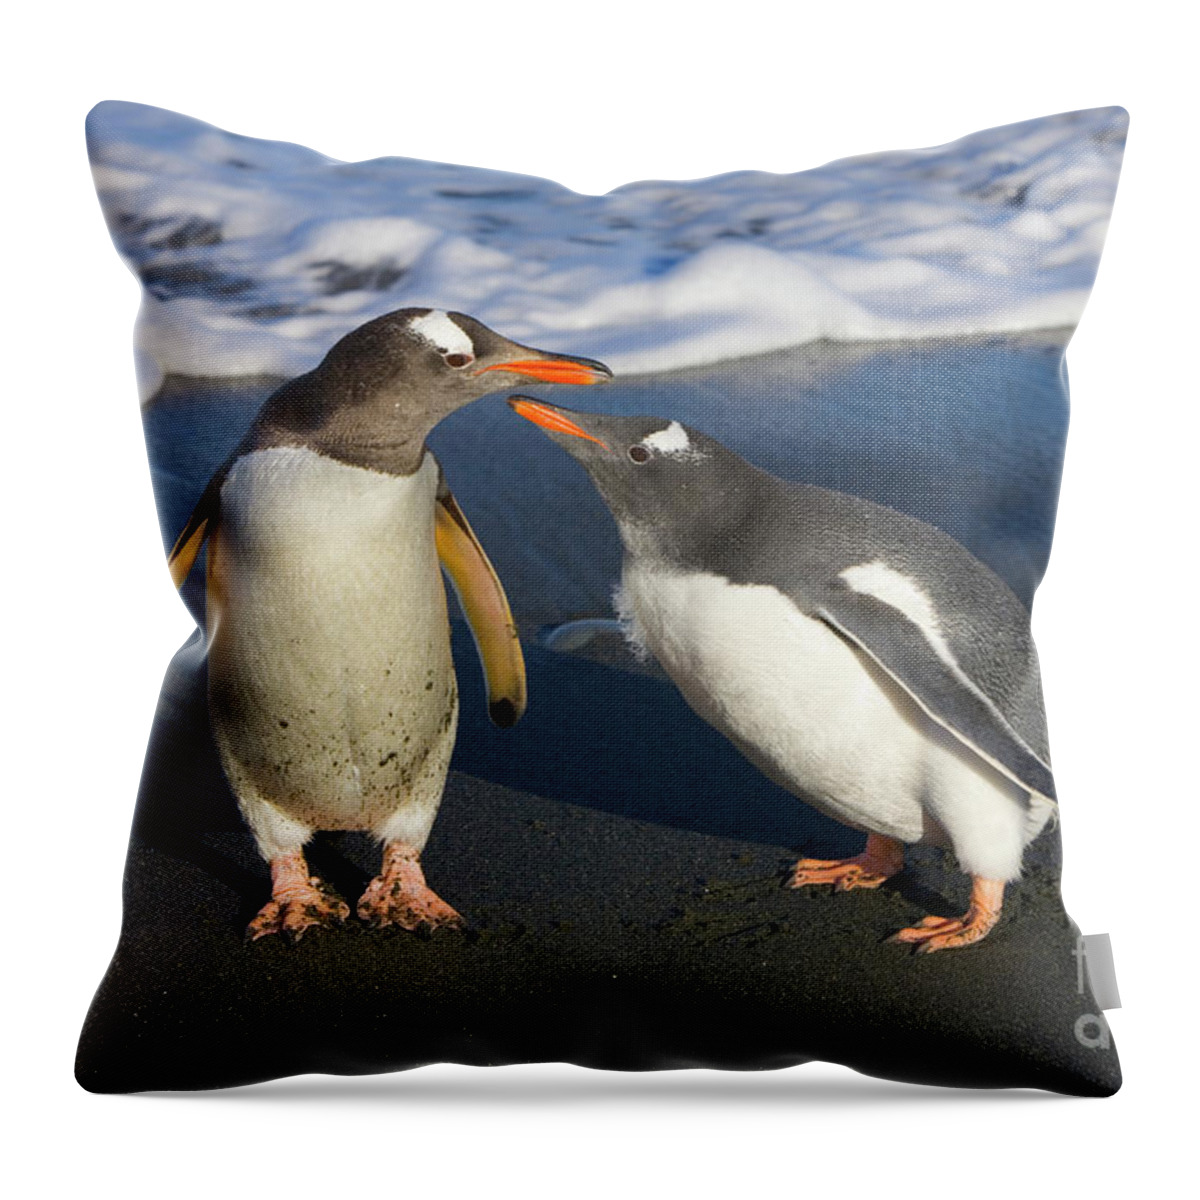 00345356 Throw Pillow featuring the photograph Gentoo Penguin Chick Begging For Food by Yva Momatiuk and John Eastcott